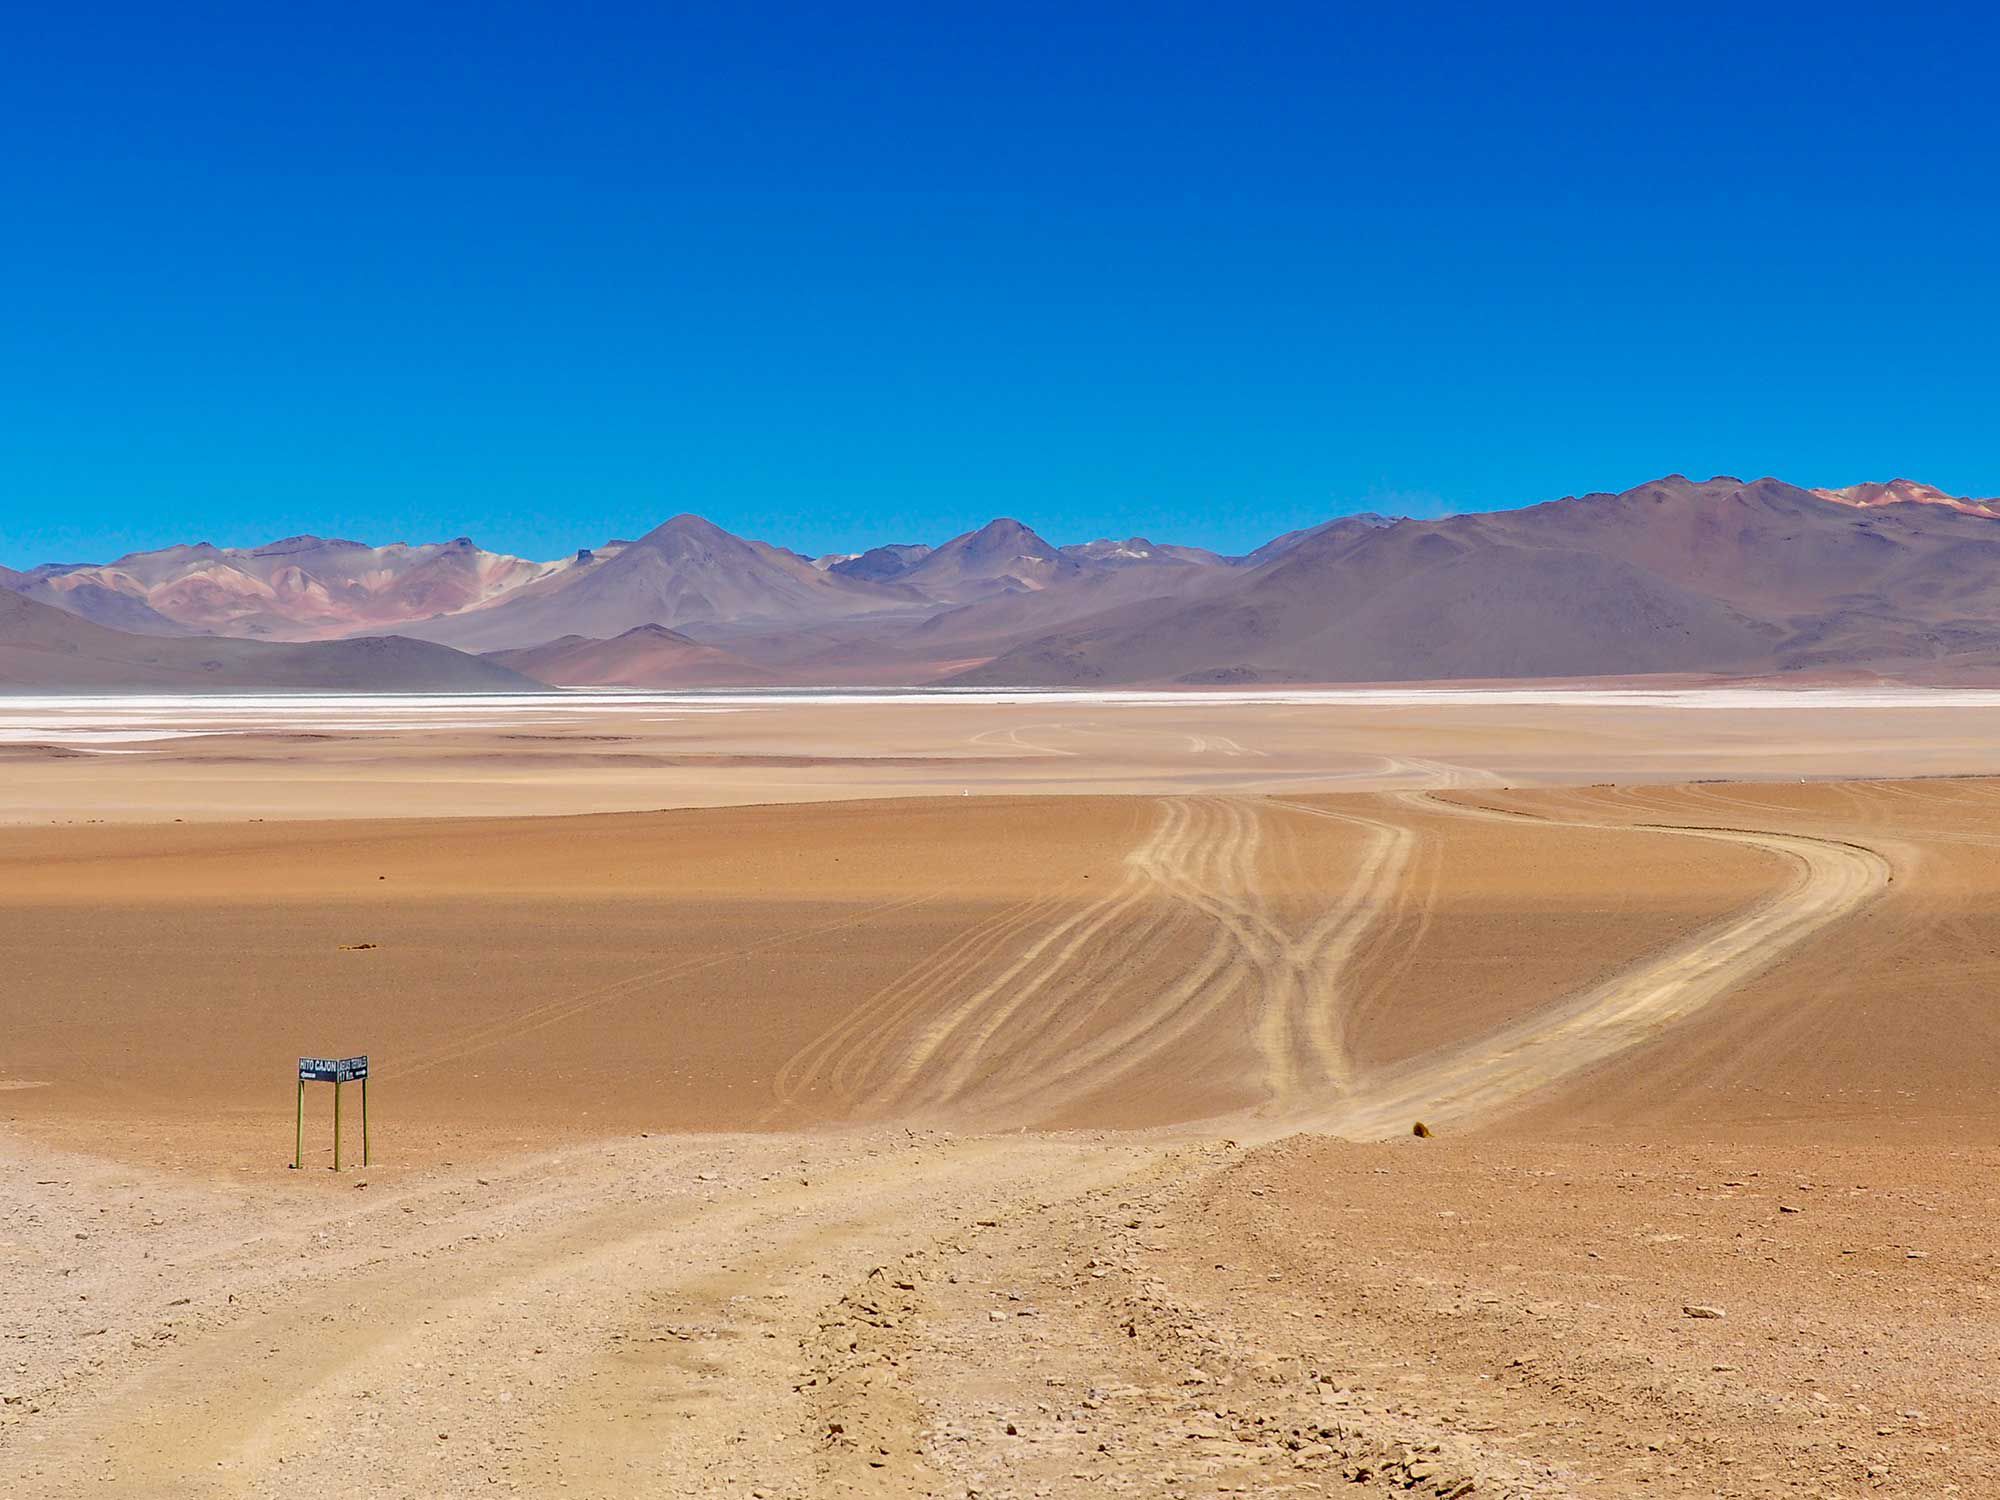 Roads can get a little confusing out beyond Uyuni, Bolivia, especially in the fading light, while looking out for your girlfriend and your cat, in the company of an inexperienced rider and his injured passenger.